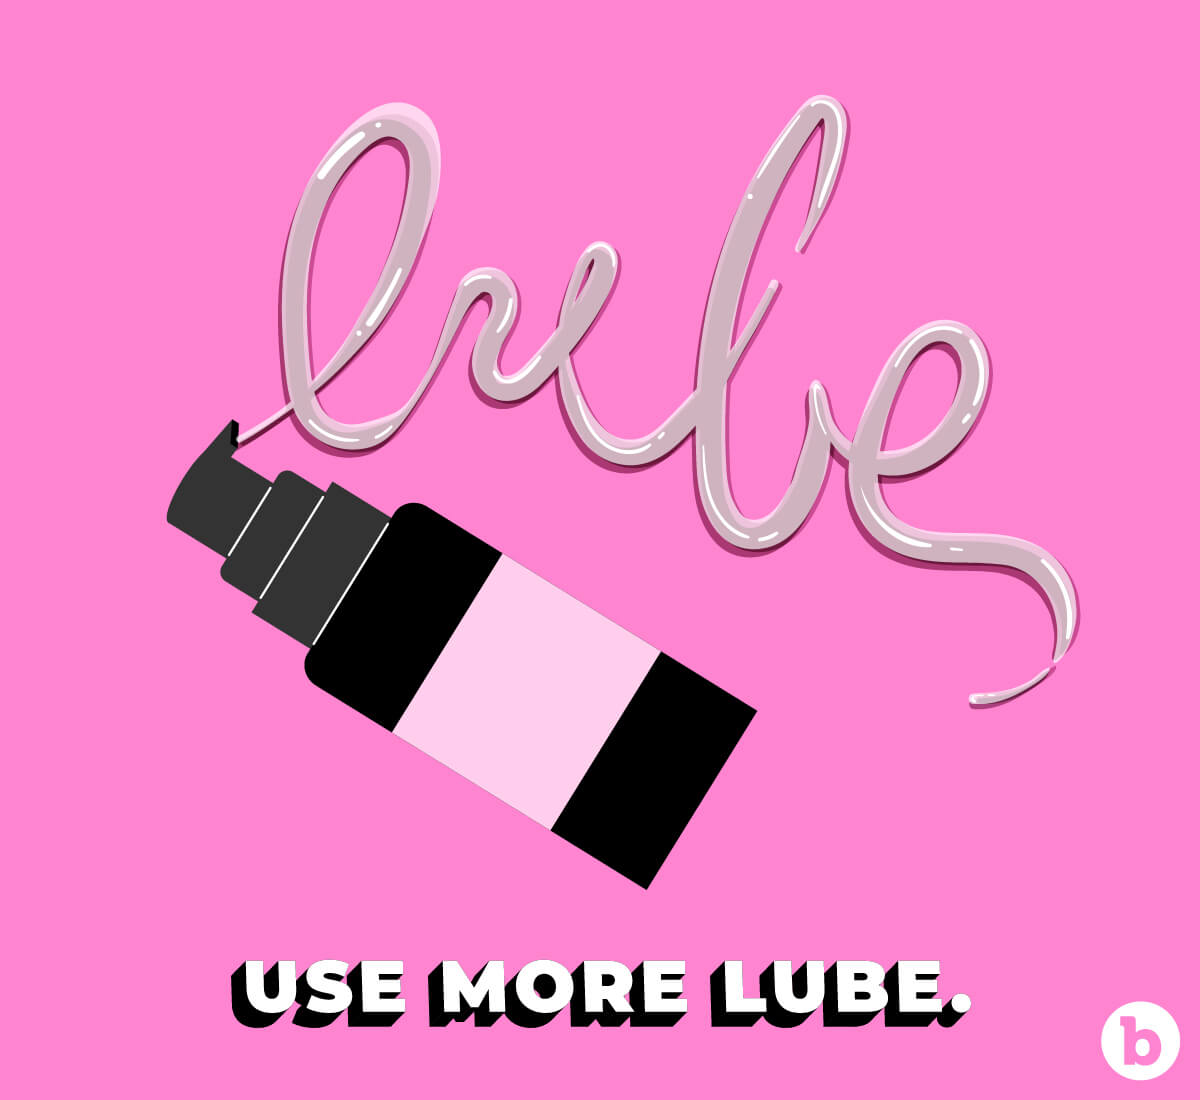 There is no such thing as too much lube when it comes to anal sex